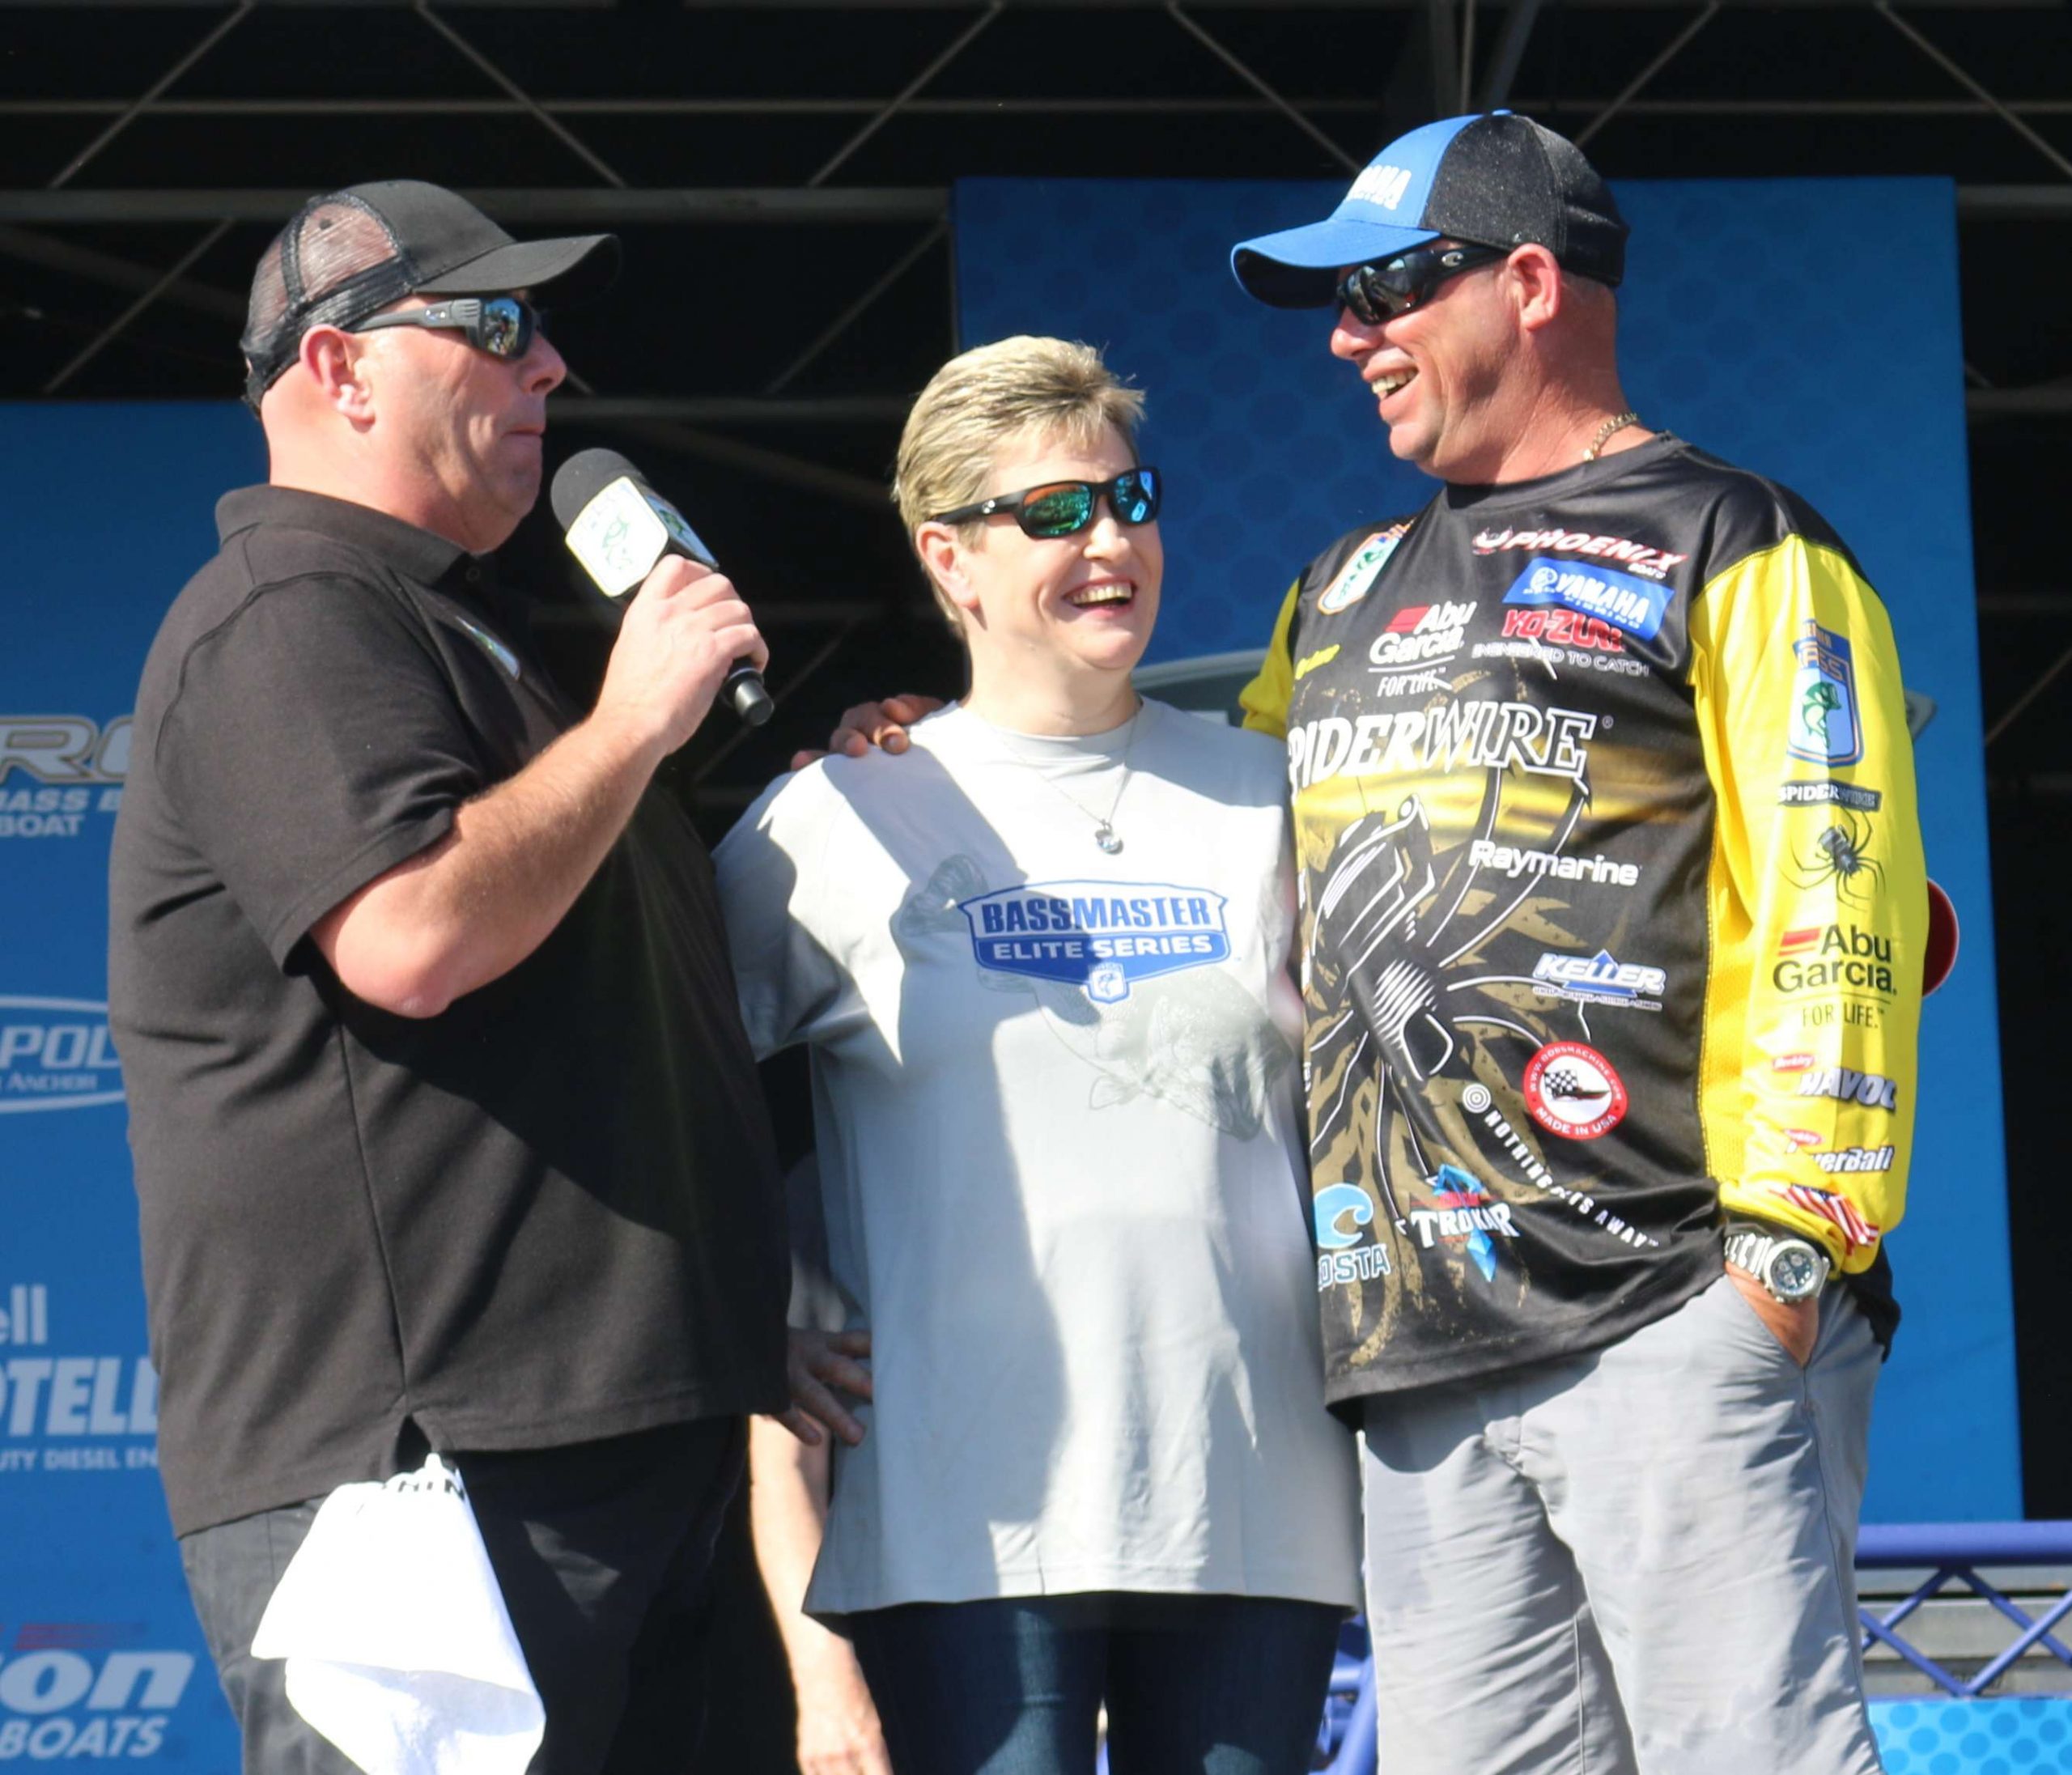 Bobby Lane Jr. is the first angler to weigh in on the final day and gets to meet Ronda for the first time. Dave Mercer wants to know if Bobby will share his winnings with Ronda if he wins the event.